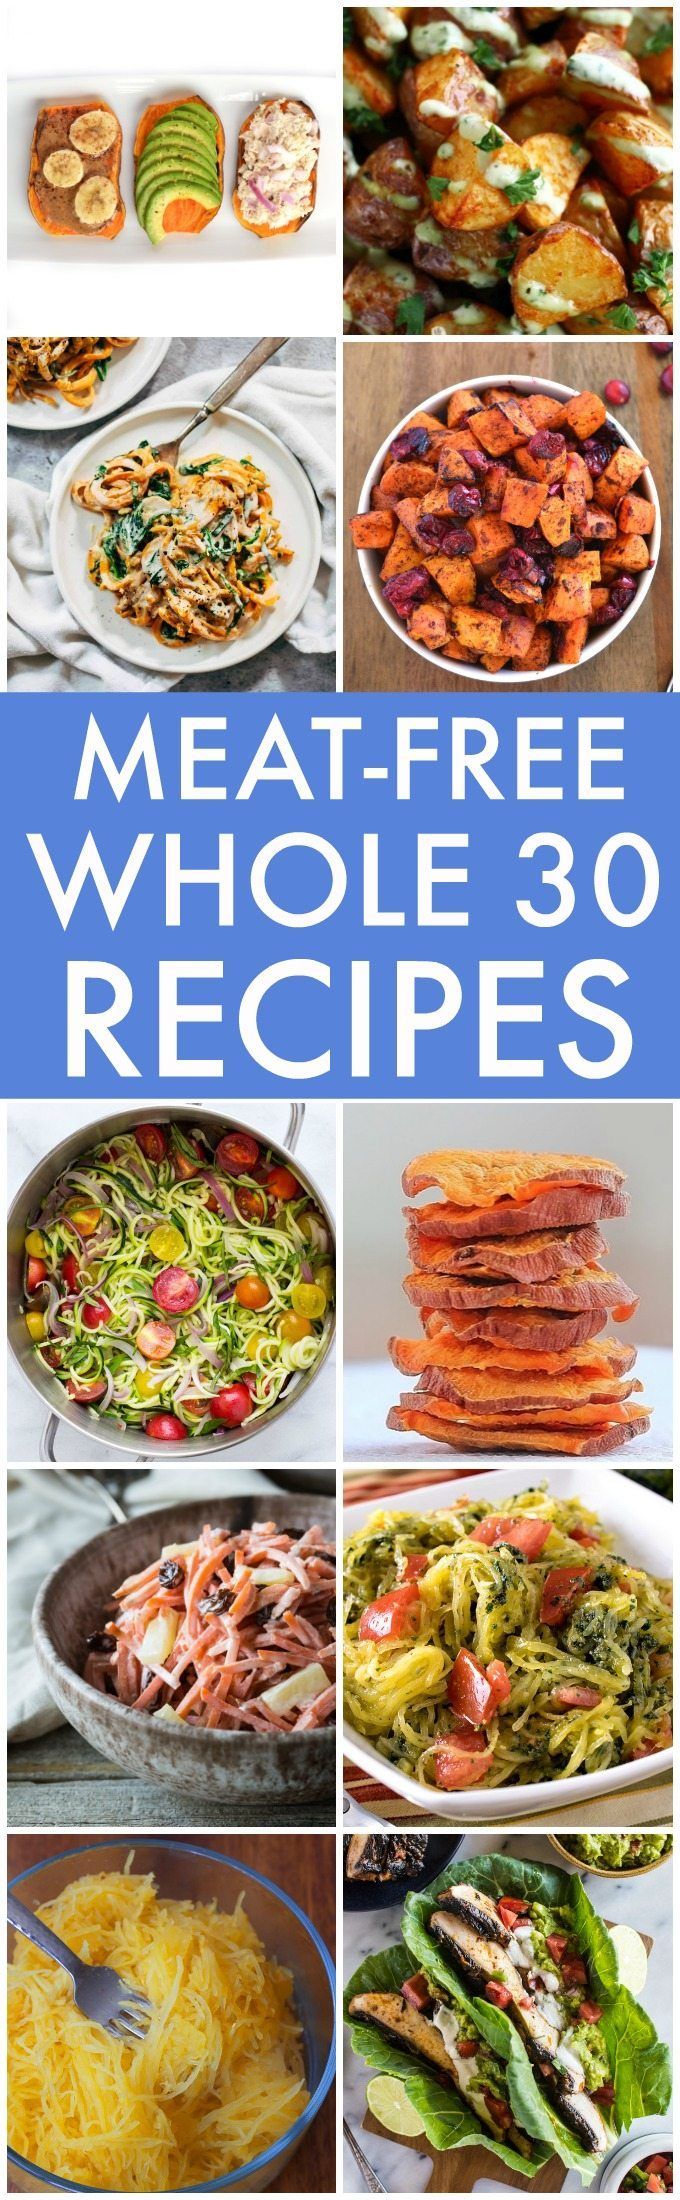 The BEST Meat-Free and Vegan Whole30 Recipes (Whole 30, Paleo, V, GF)- The BEST easy, quick and healthy whole30 recipes